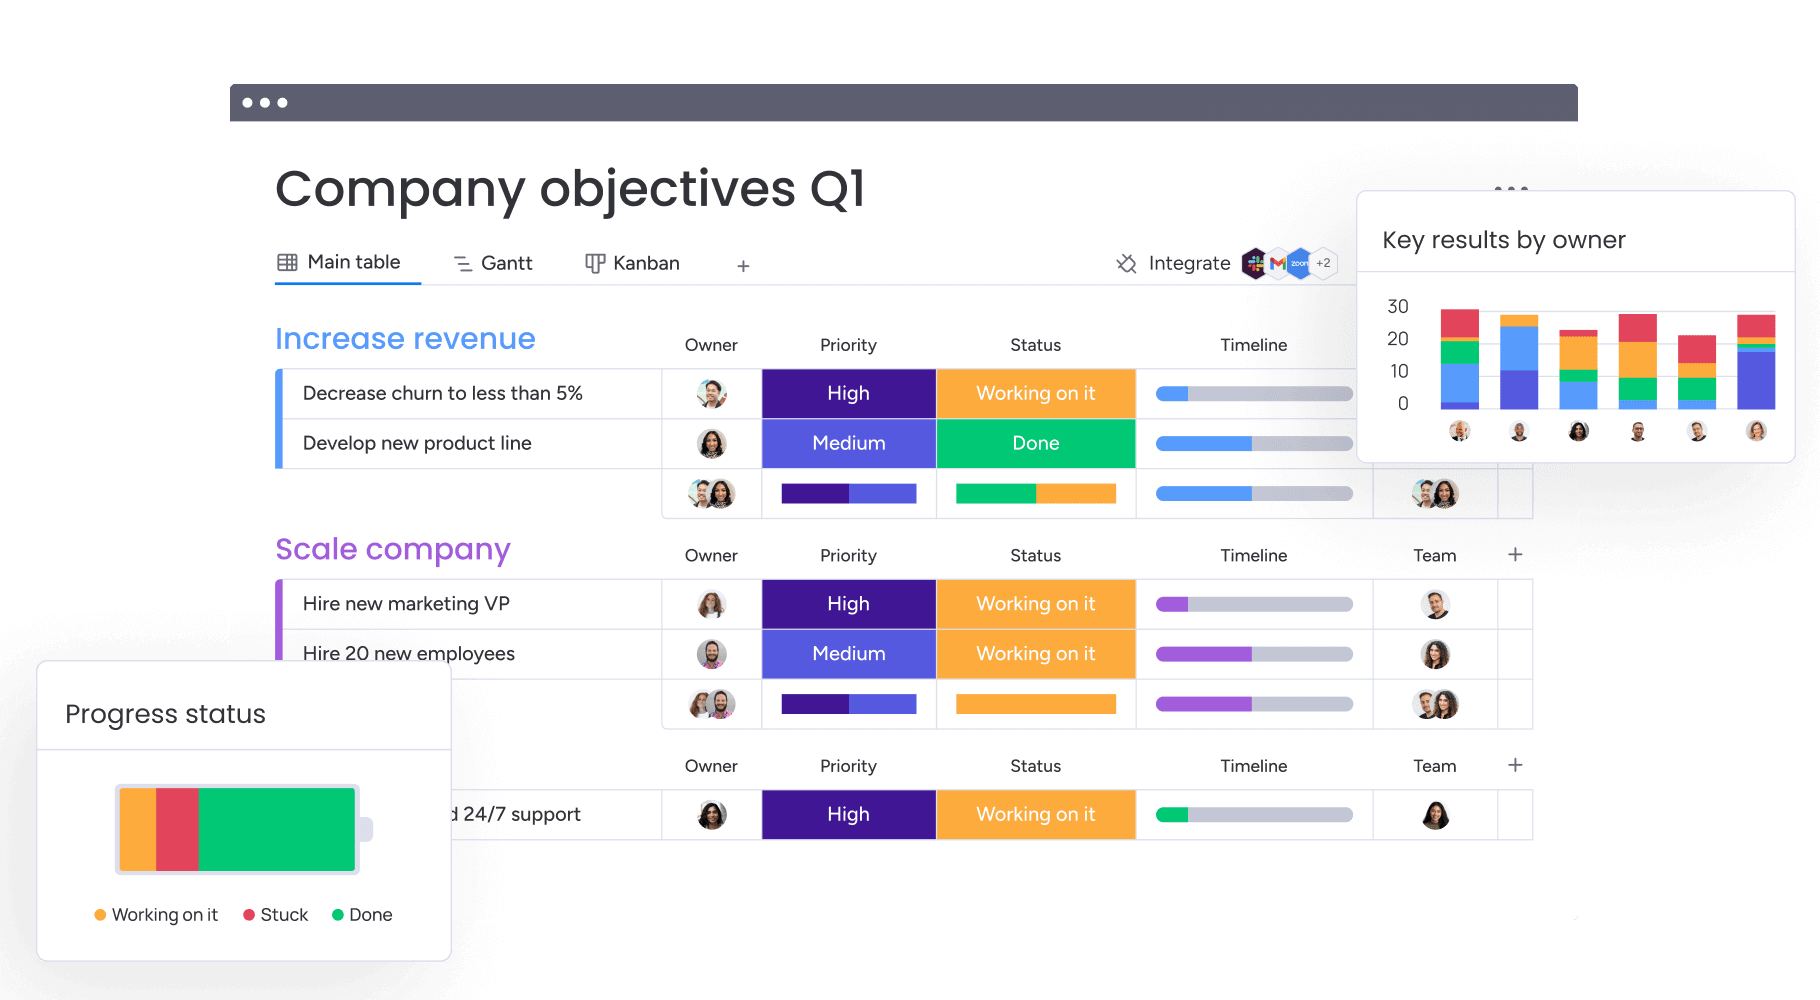 Marketing objectives dashboard in Monday including progress status, key results with owner, priority and status.